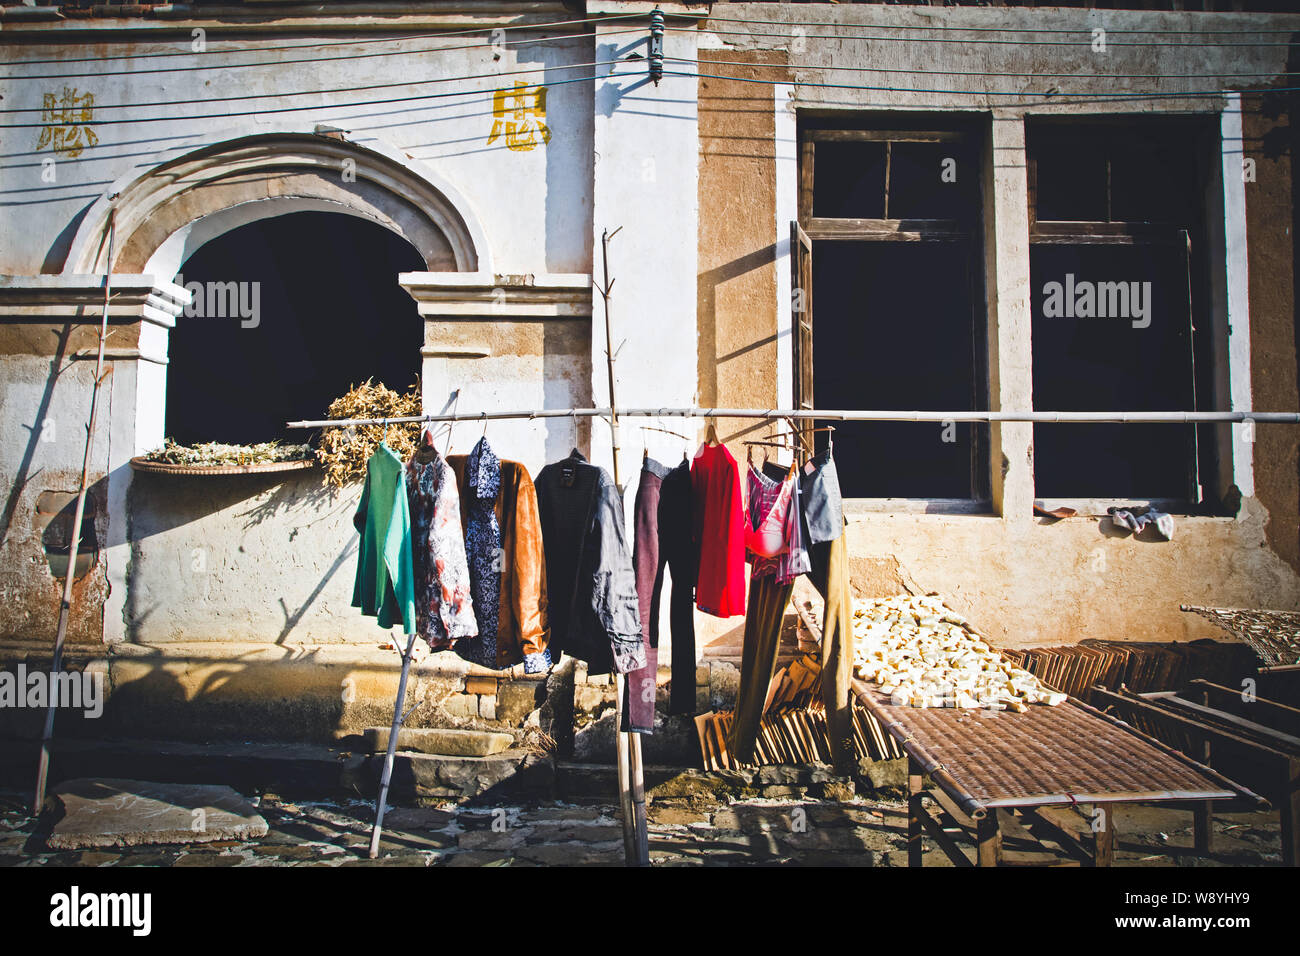 Local Chinese residents use a bamboo pole to air out clothes in front of a building in Heishi Village, PanAn county, east Chinas Zhejiang province, 23 Stock Photo